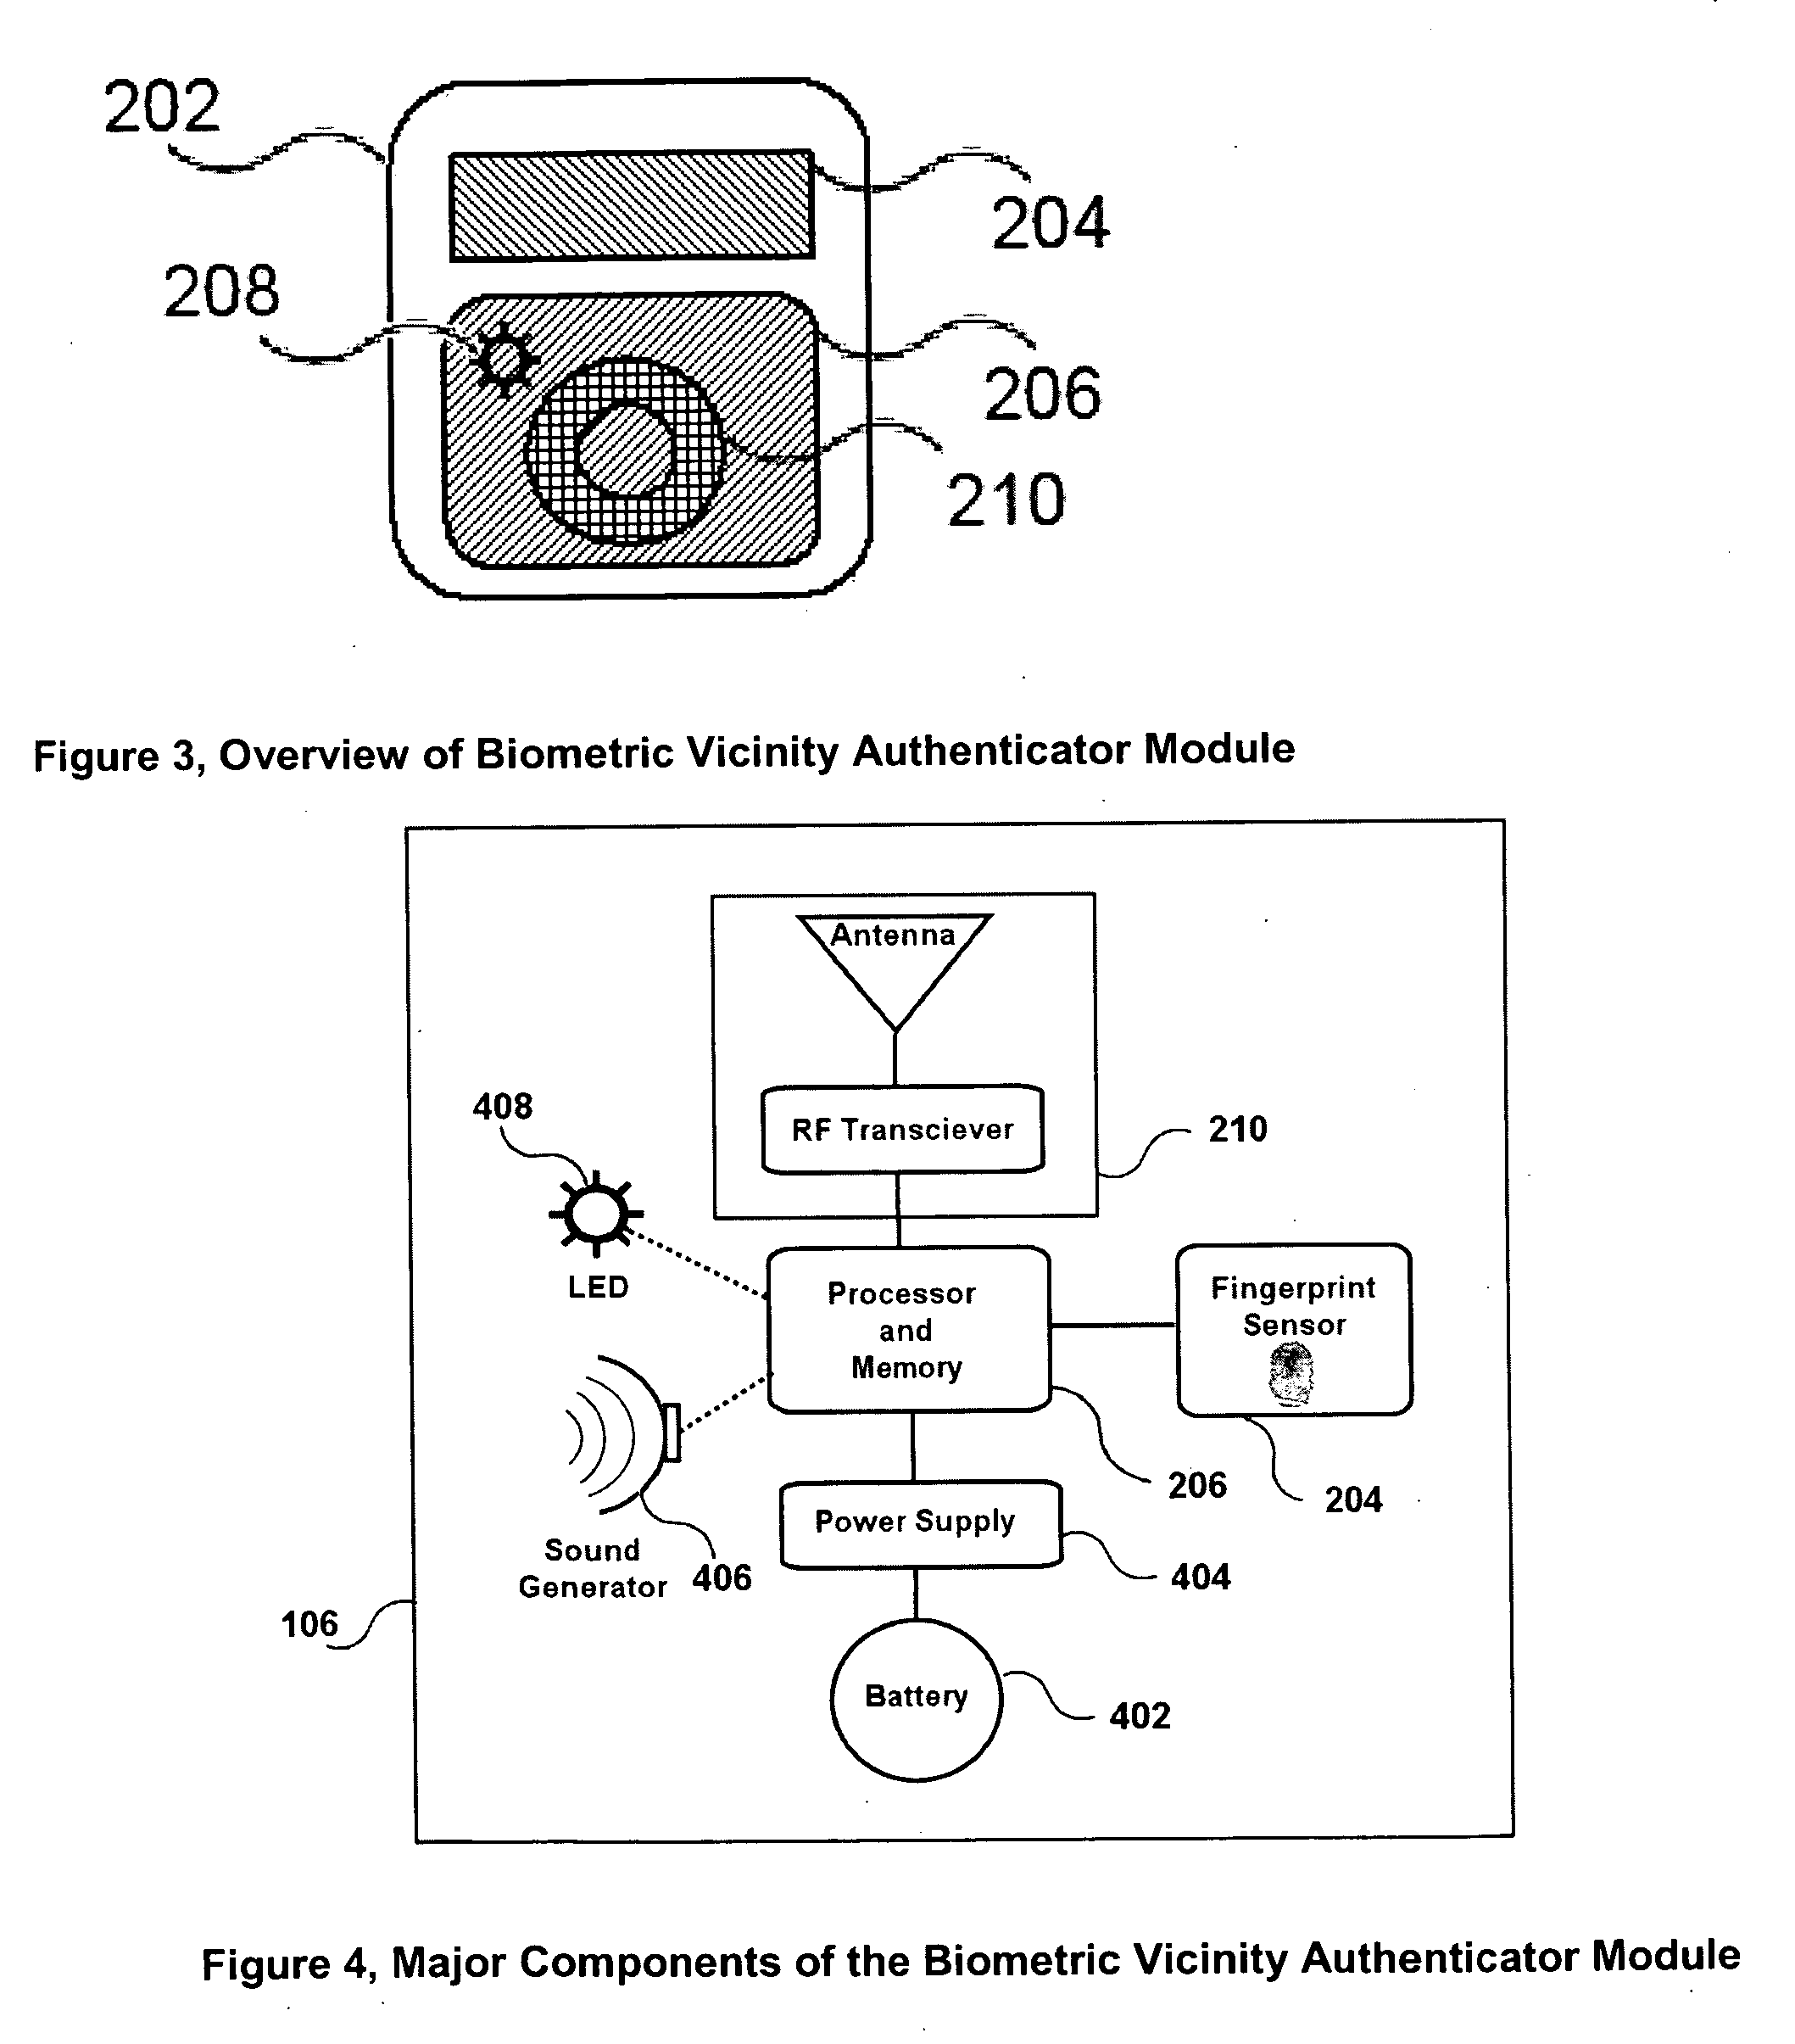 Attachable biometric authentication apparatus for watchbands and other personal items